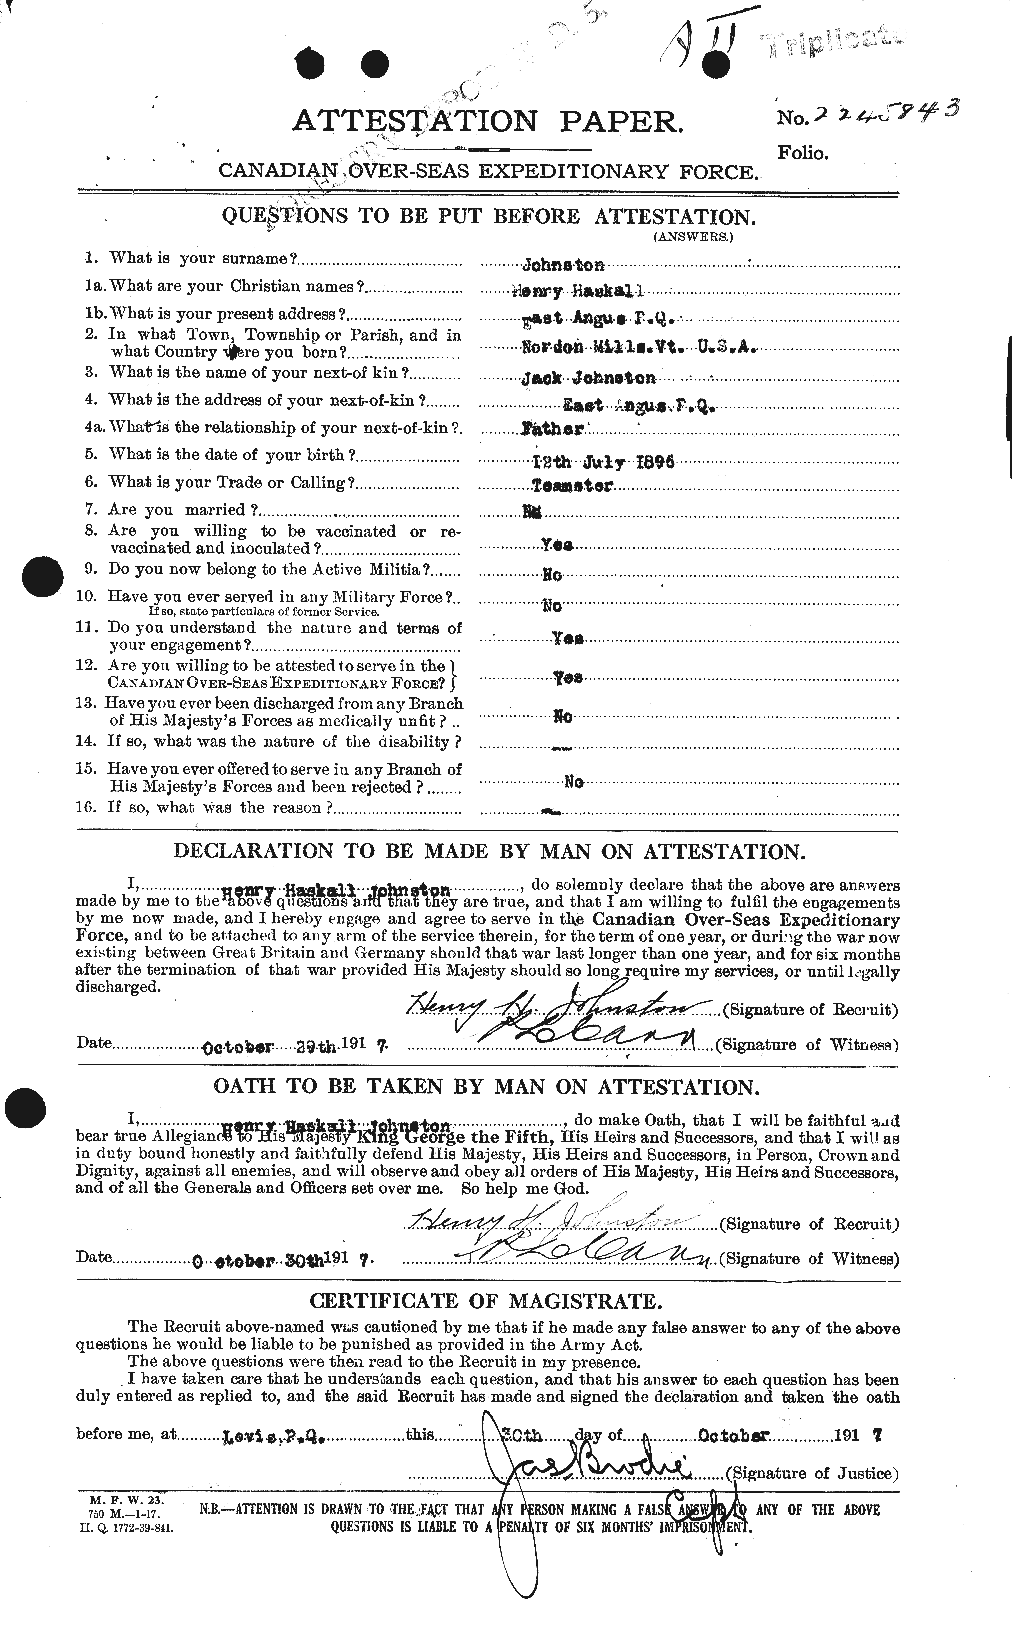 Personnel Records of the First World War - CEF 419543a